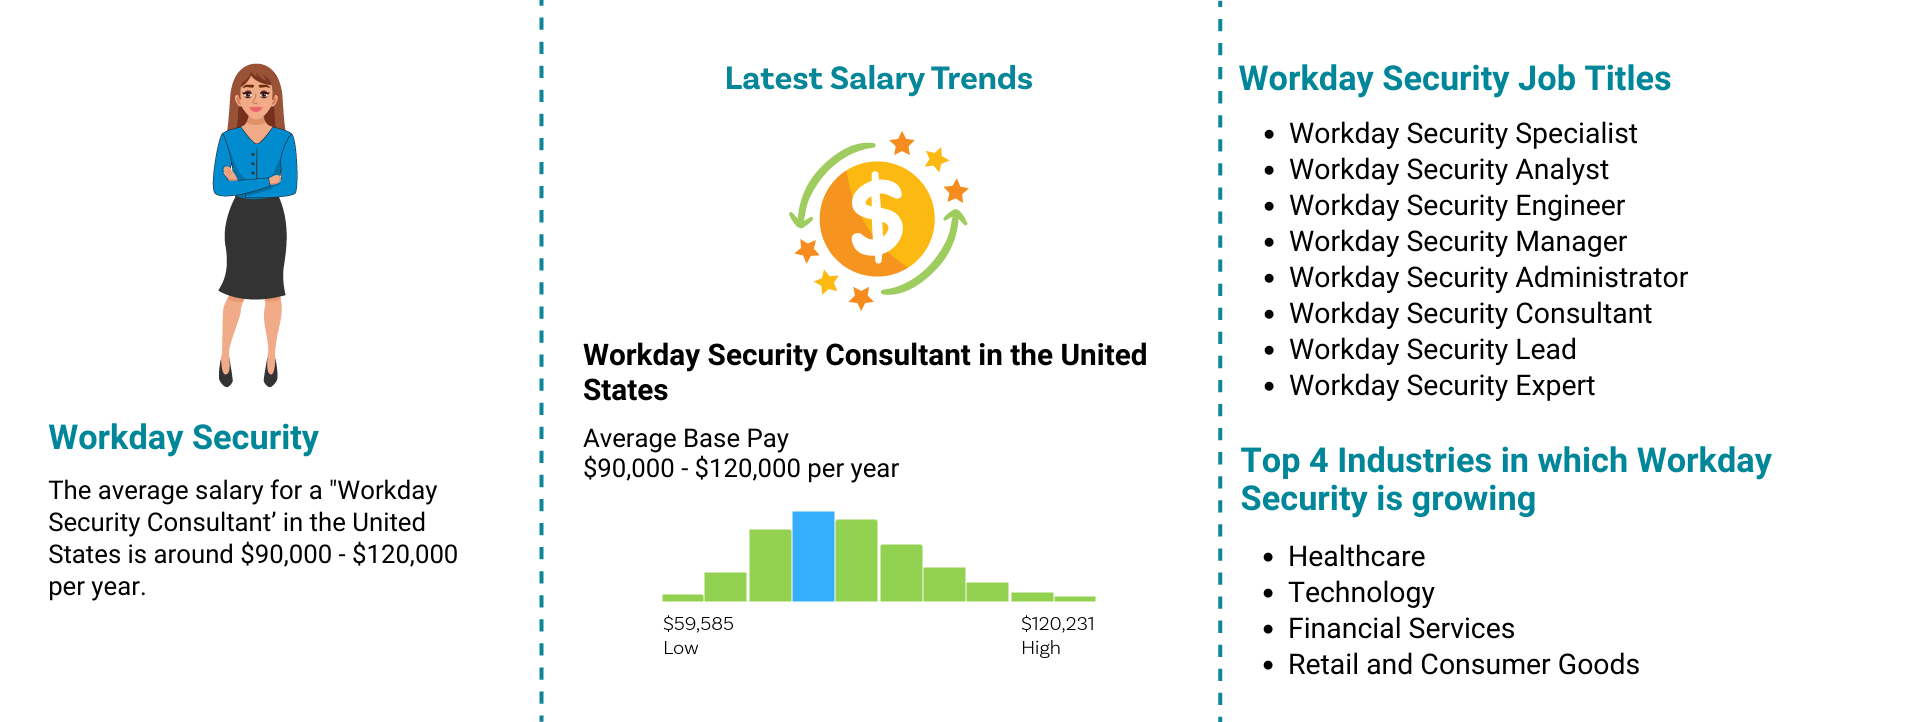 Workday Security Job Outlook